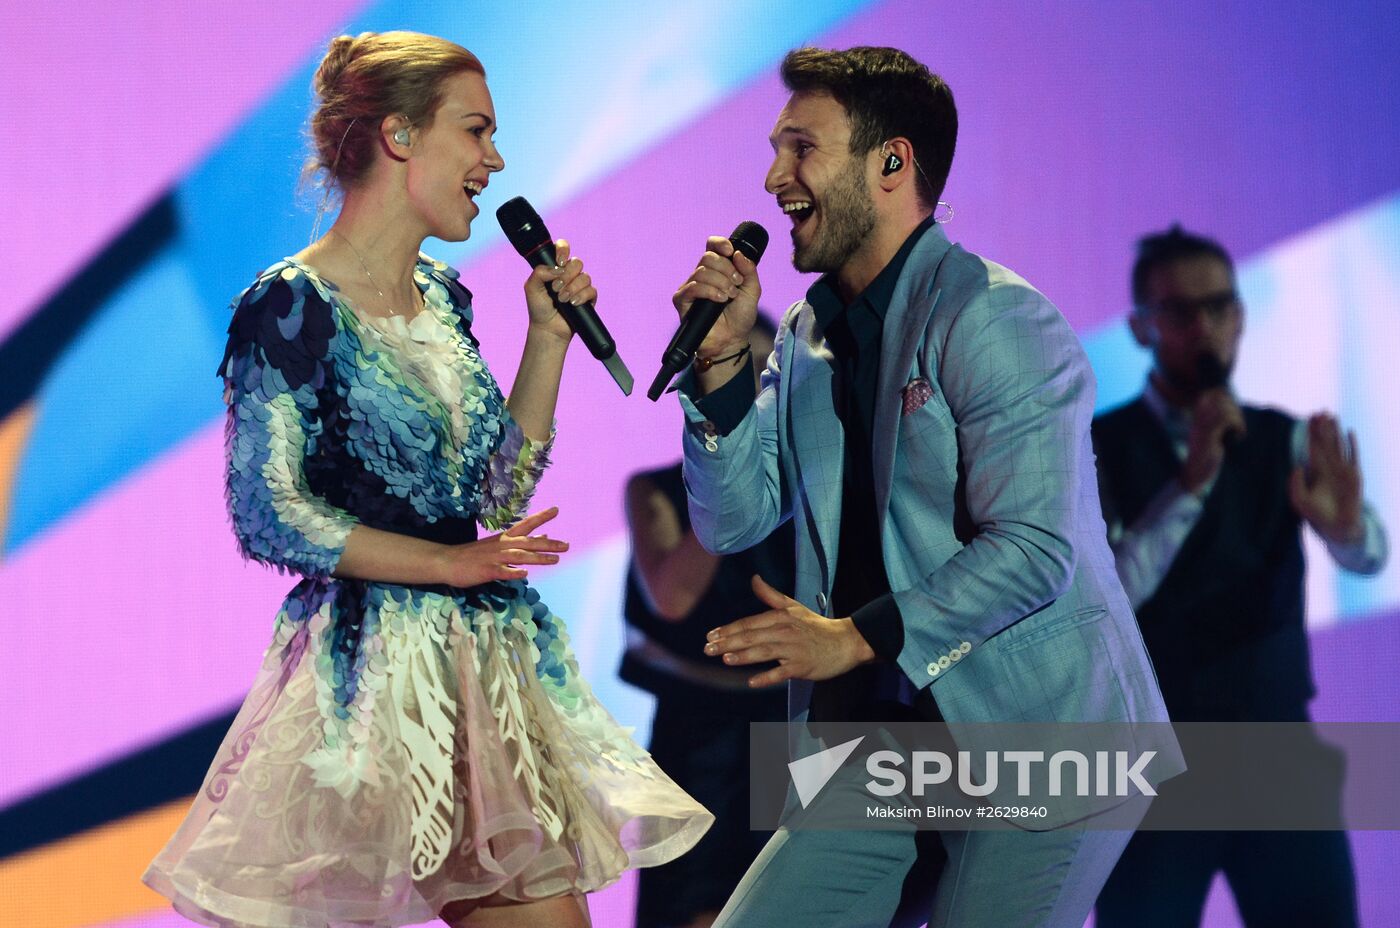 Final rehearsal for the Eurovision -2015 Song Context in Vienna